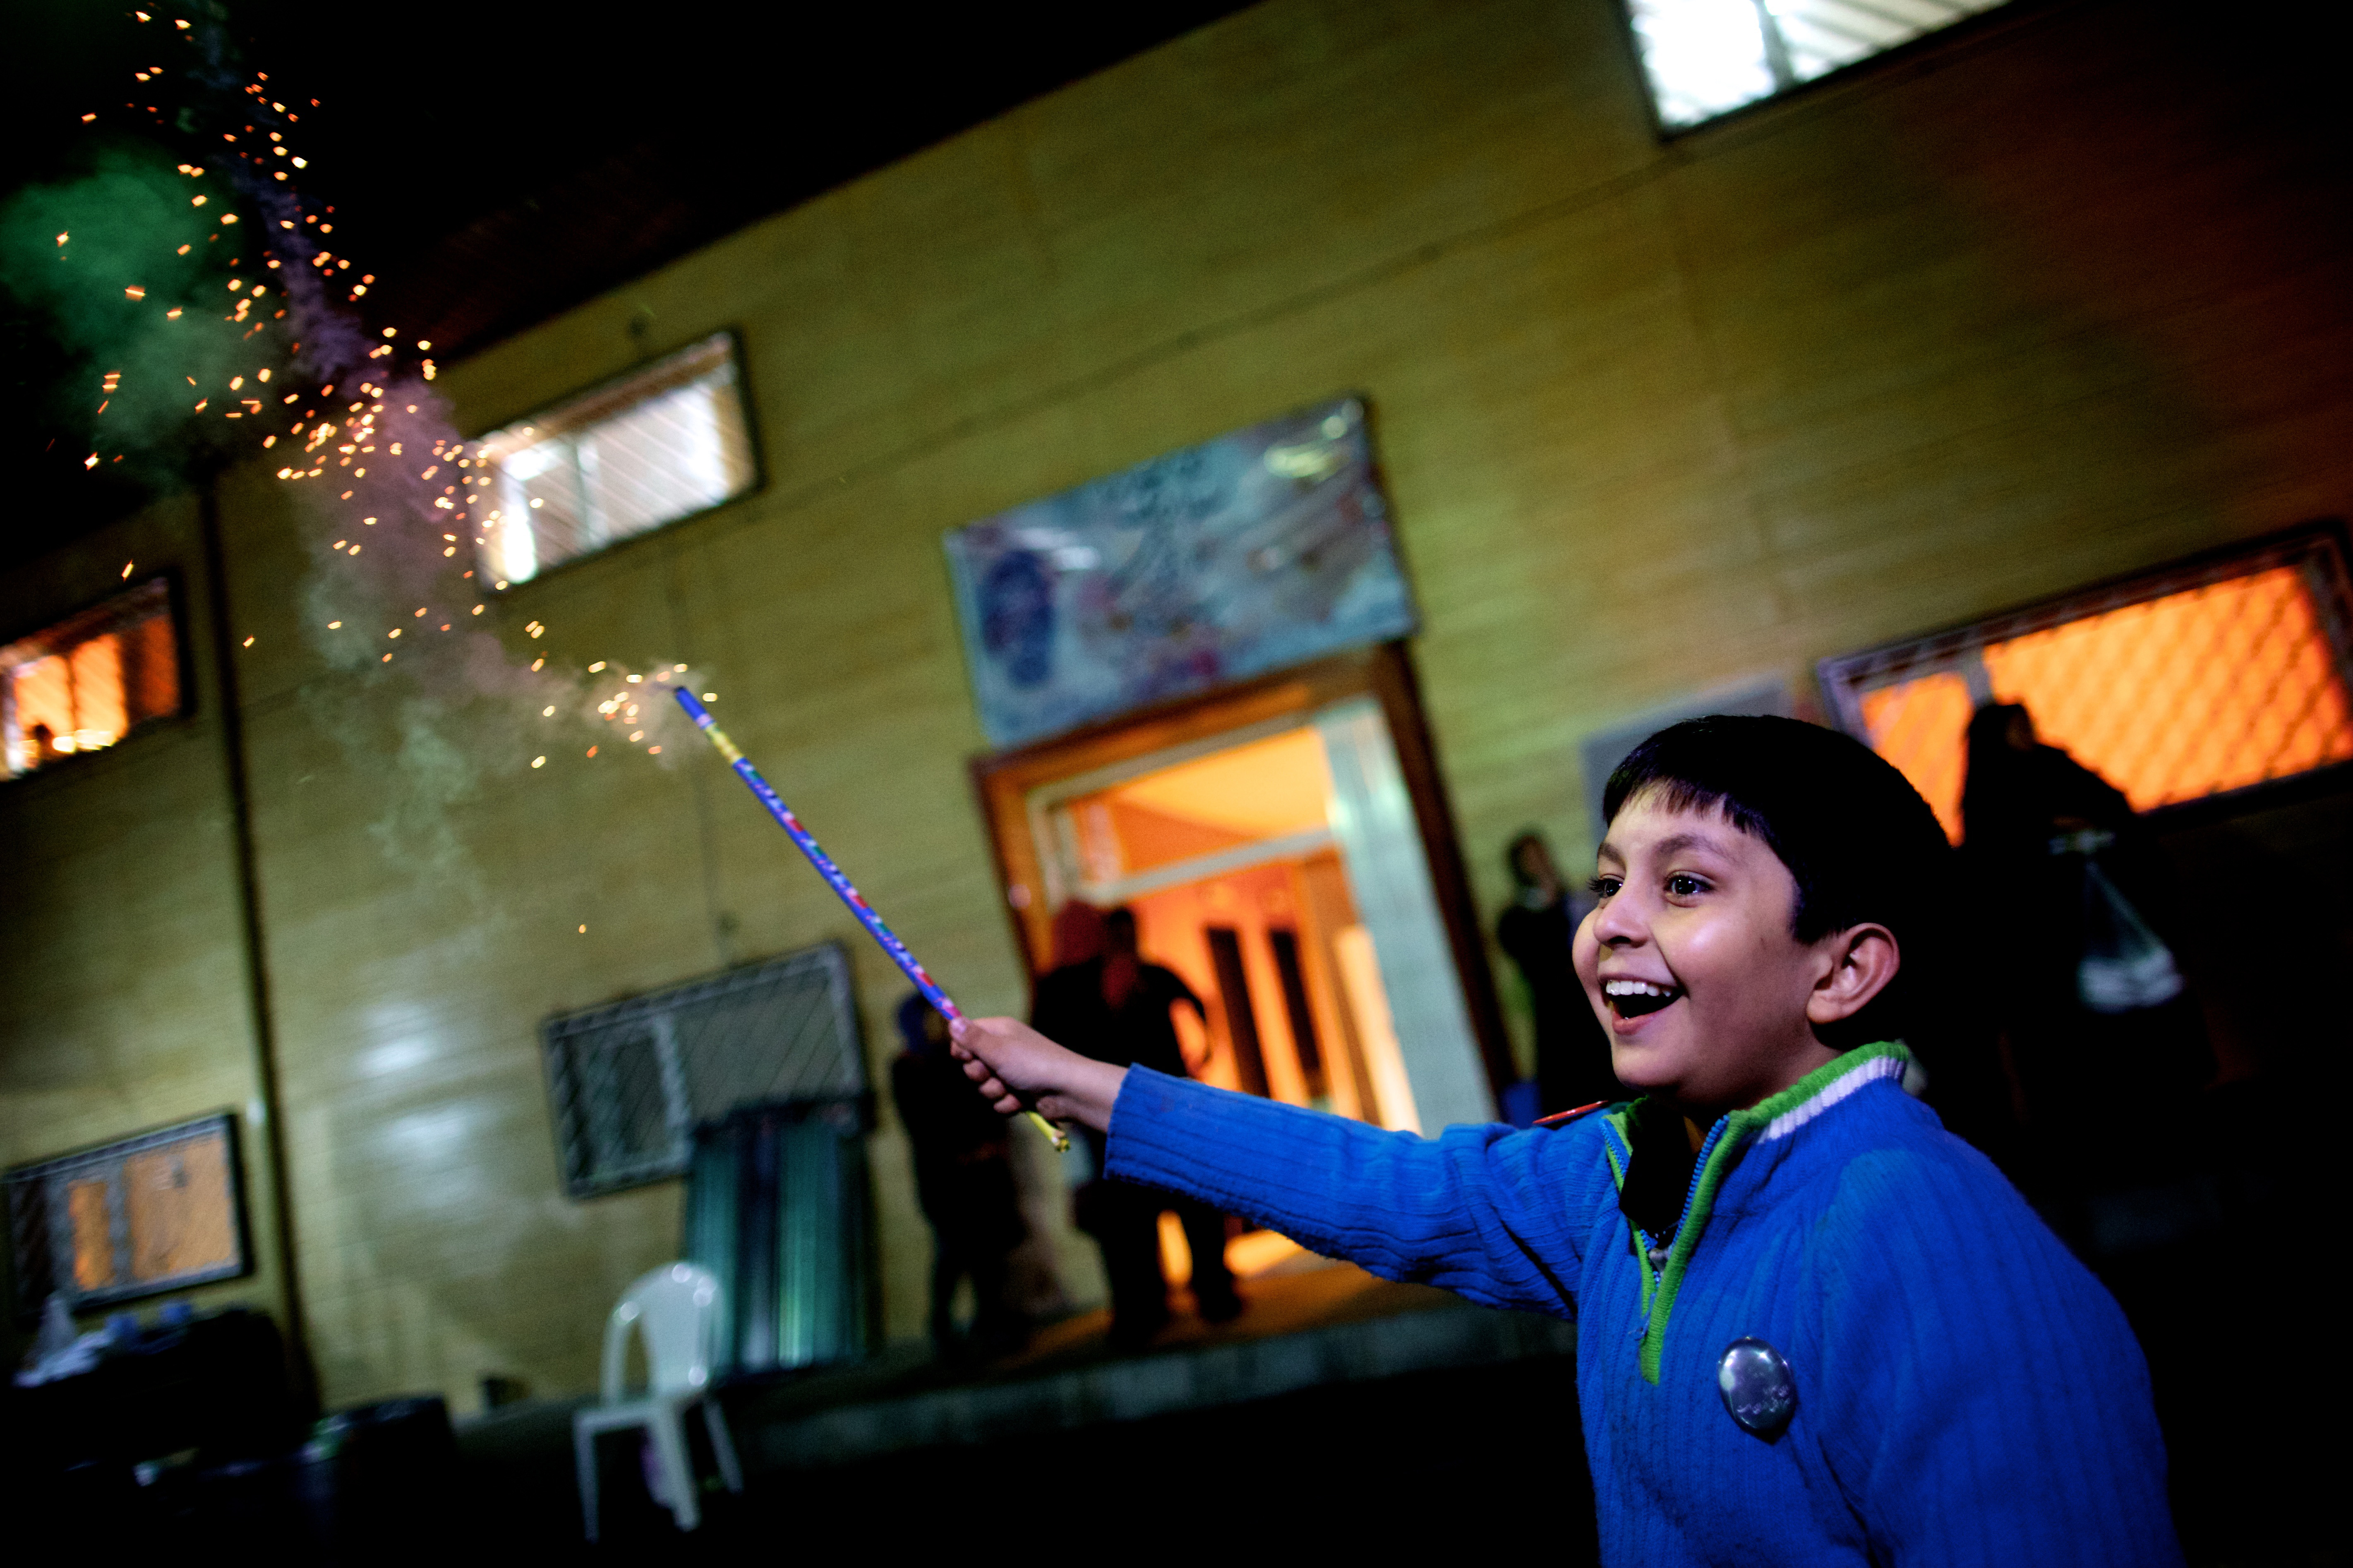 An Iranian boy holds a fire cracker in southern Tehran on March 19, 2013 during the Wednesday Fire feast, or Chaharshanbeh Soori, held annually on the last Wednesday eve before the Spring holiday of Noruz. The Iranian new year that begins on March 20 coincides with the first day of spring during which locals revive the Zoroastrian celebration of lighting a fire and dancing around the flame. AFP PHOTO/BEHROUZ MEHRI        (Photo credit should read BEHROUZ MEHRI/AFP/Getty Images)